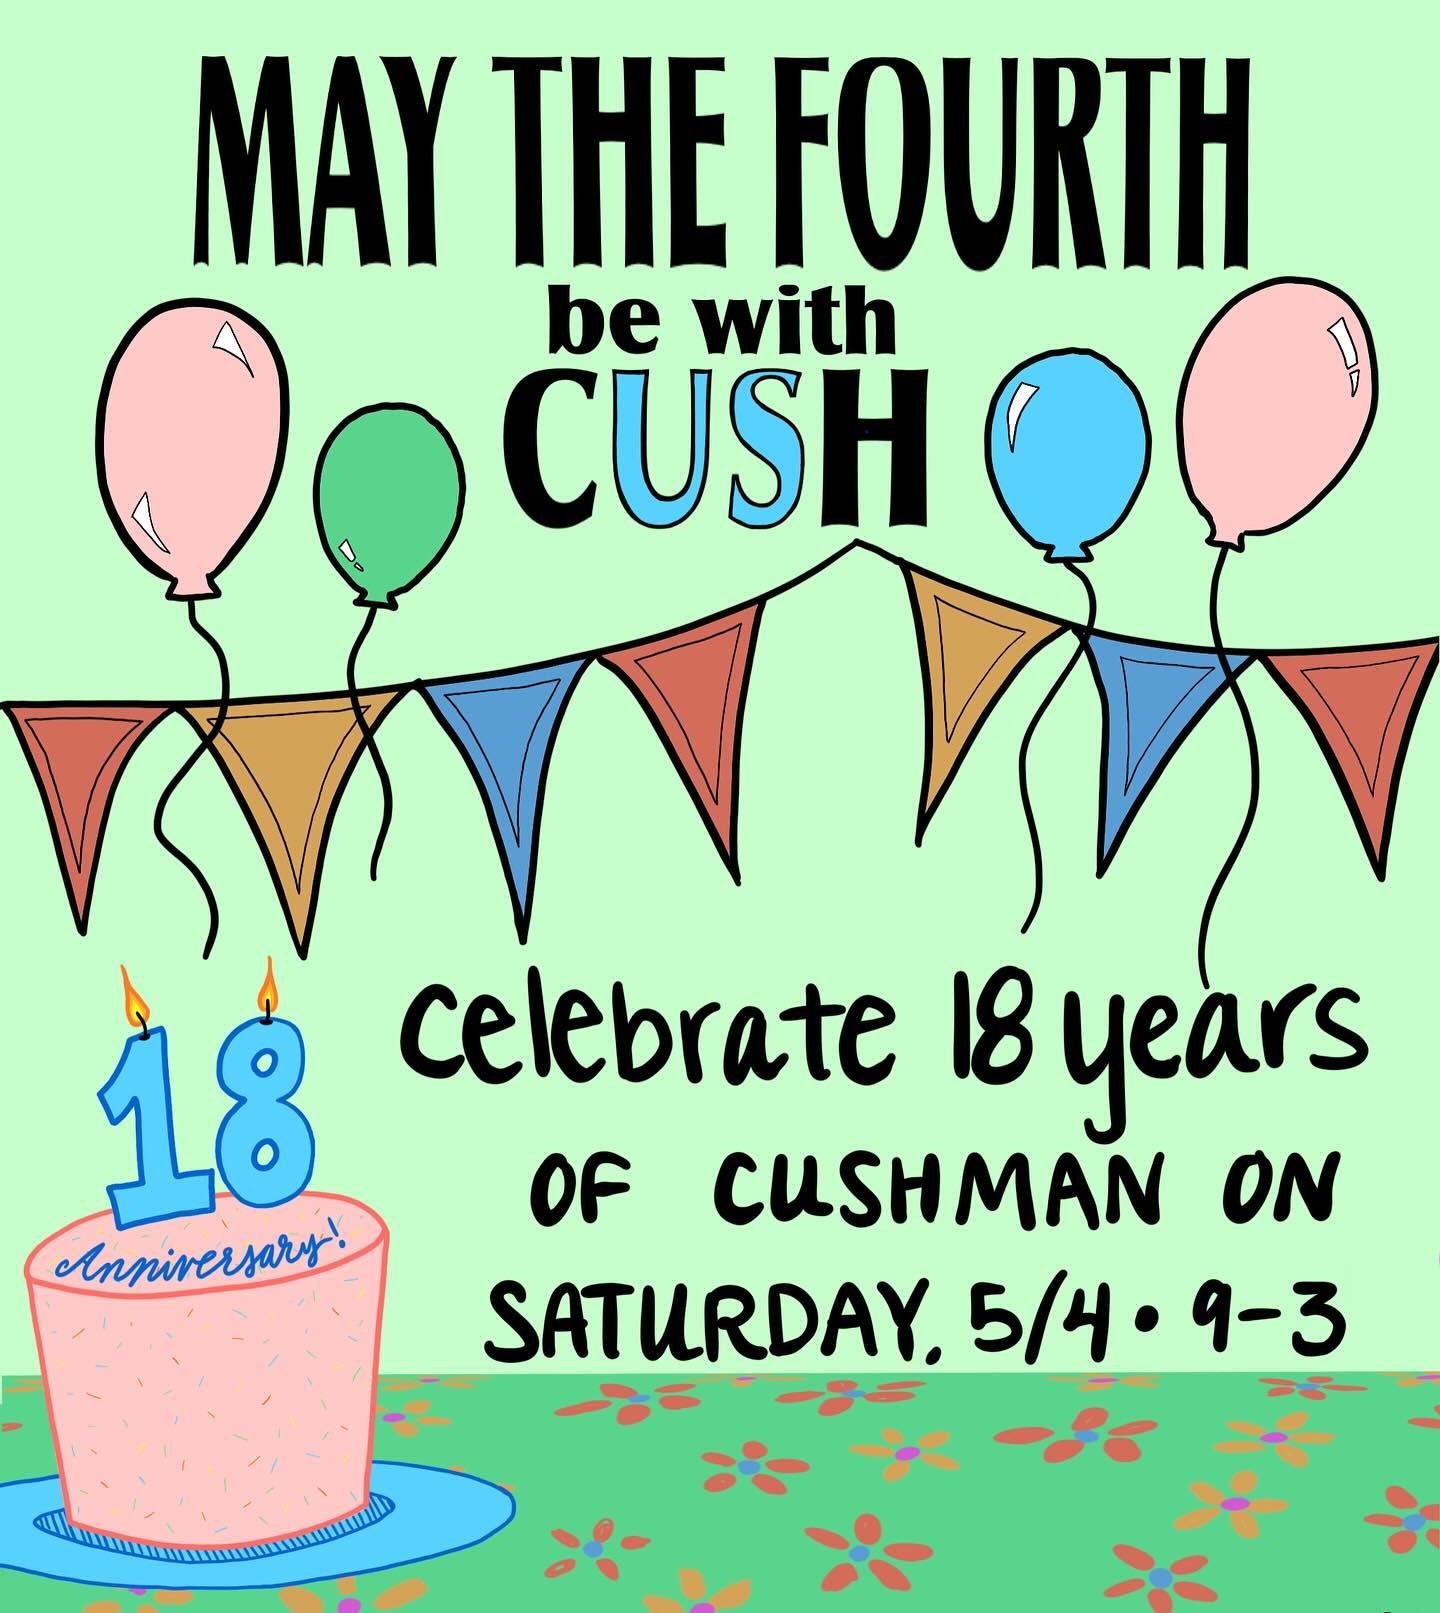 Cushman trivia &bull; Cushman swag &bull; Spin the barista wheel for goodies and booby prizes &bull; Photo Booth with Lil&rsquo; Poulet the Cushman Mascot &bull; INTERPLAY JAZZ BAND Live music from 1-3 &bull; Extended kitchen hours until 3pm &bull;